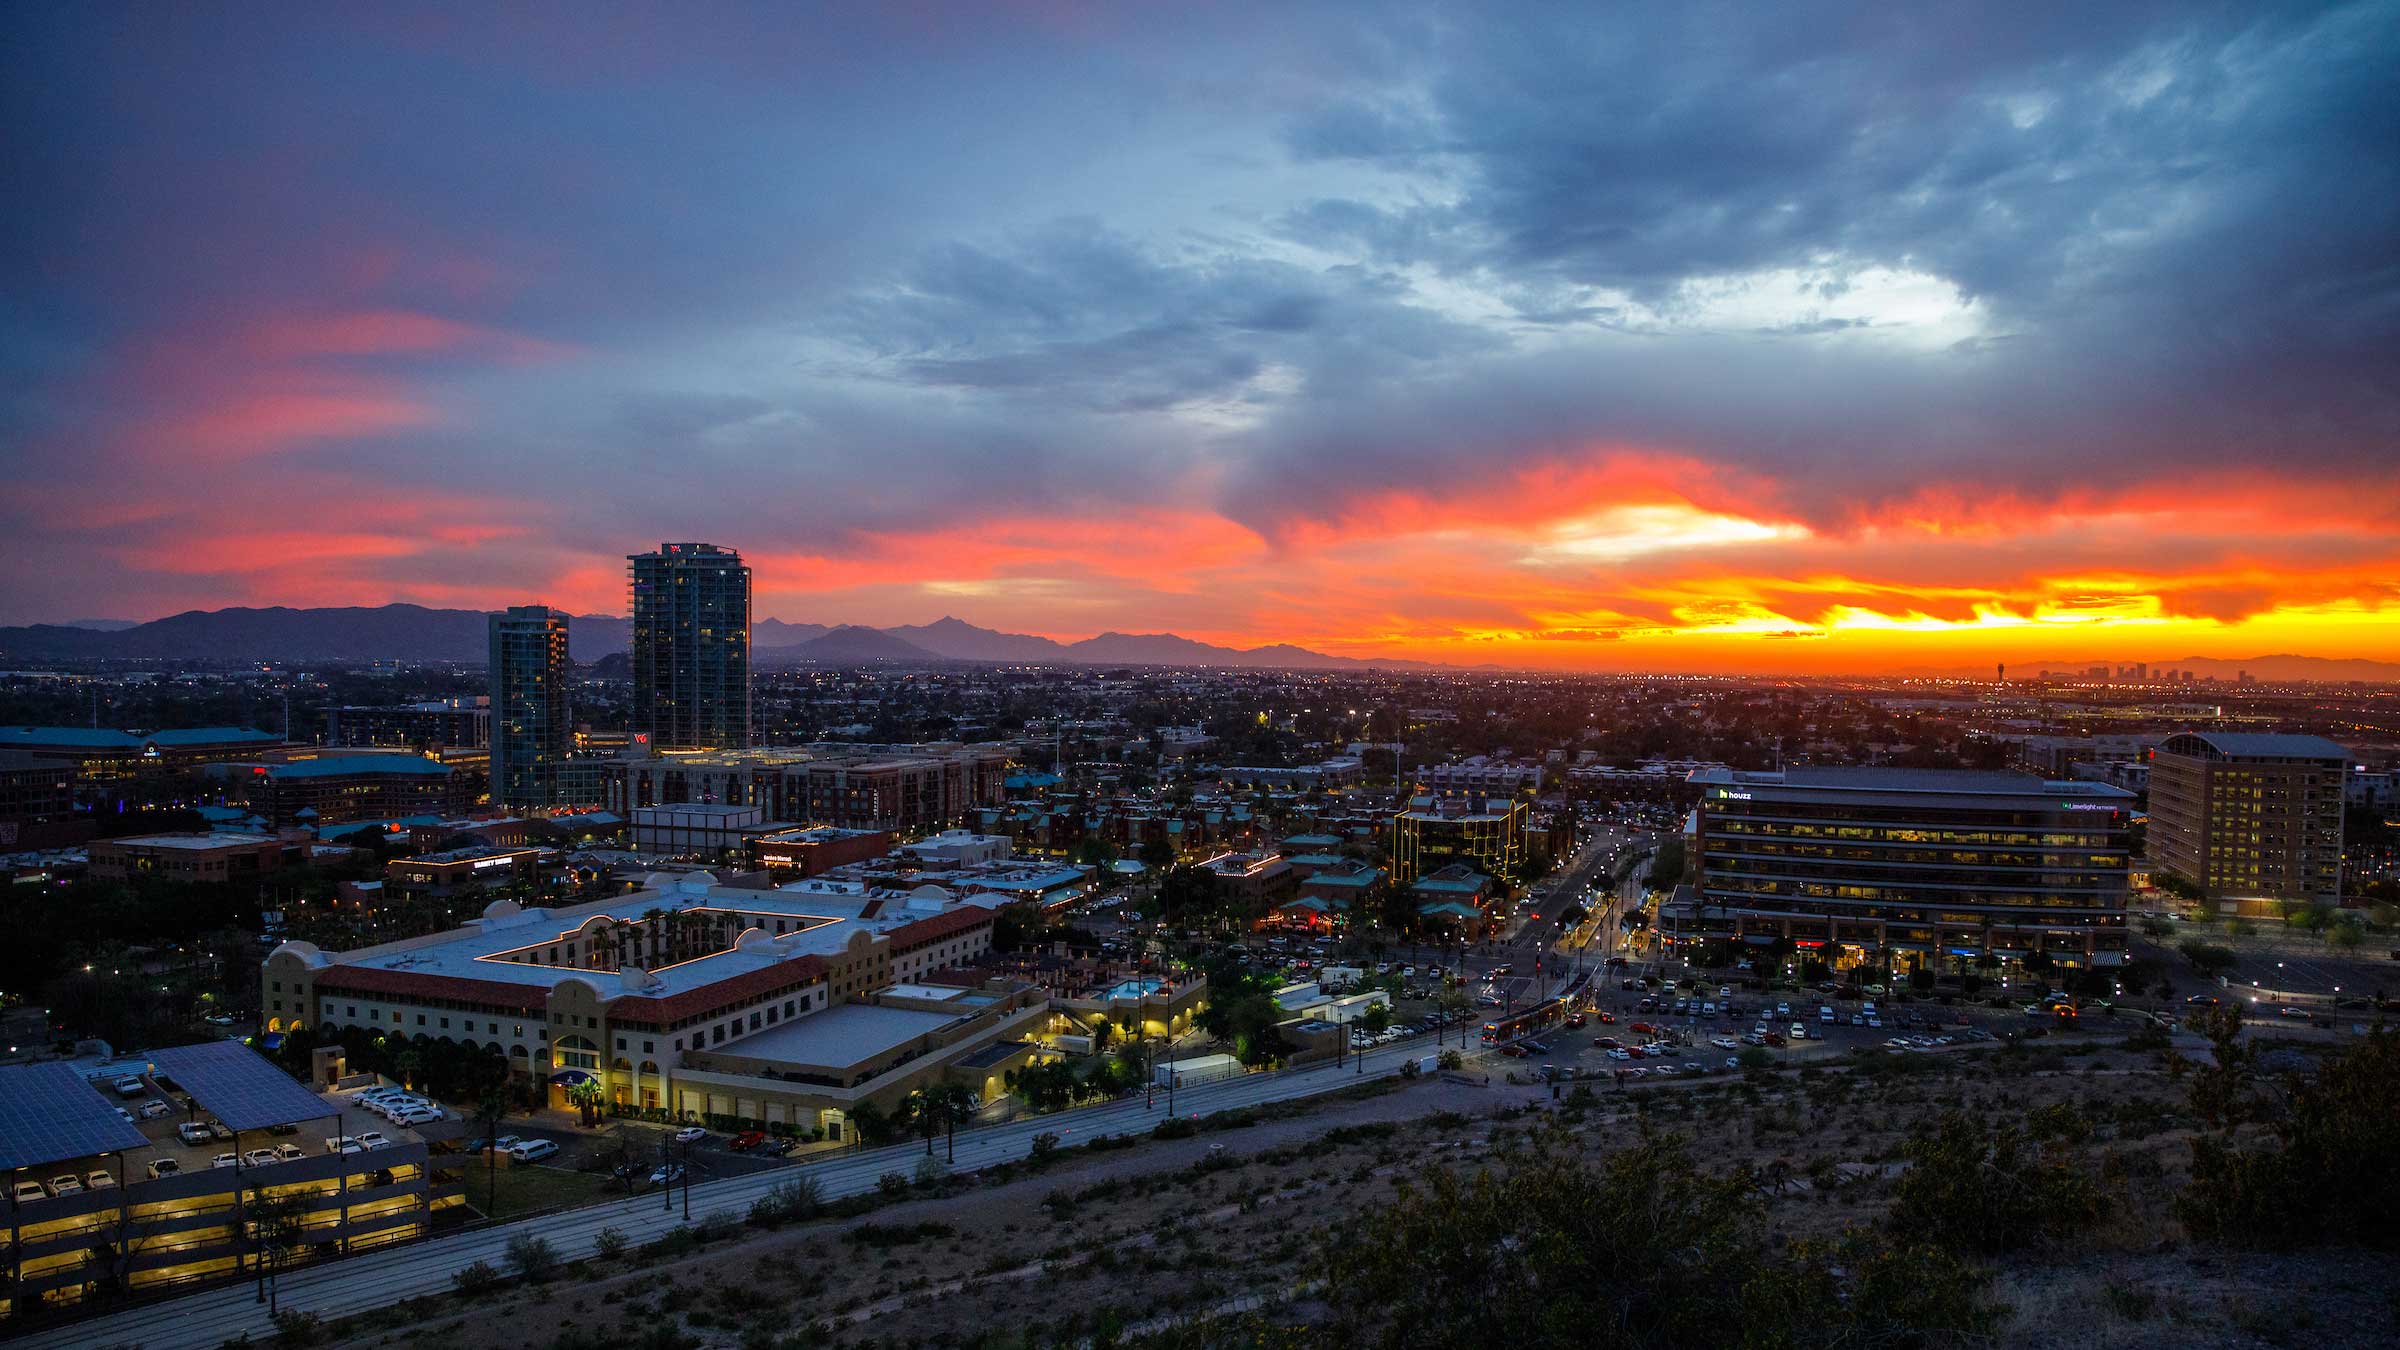 ASU campus seen at sunset from "A Mountain"